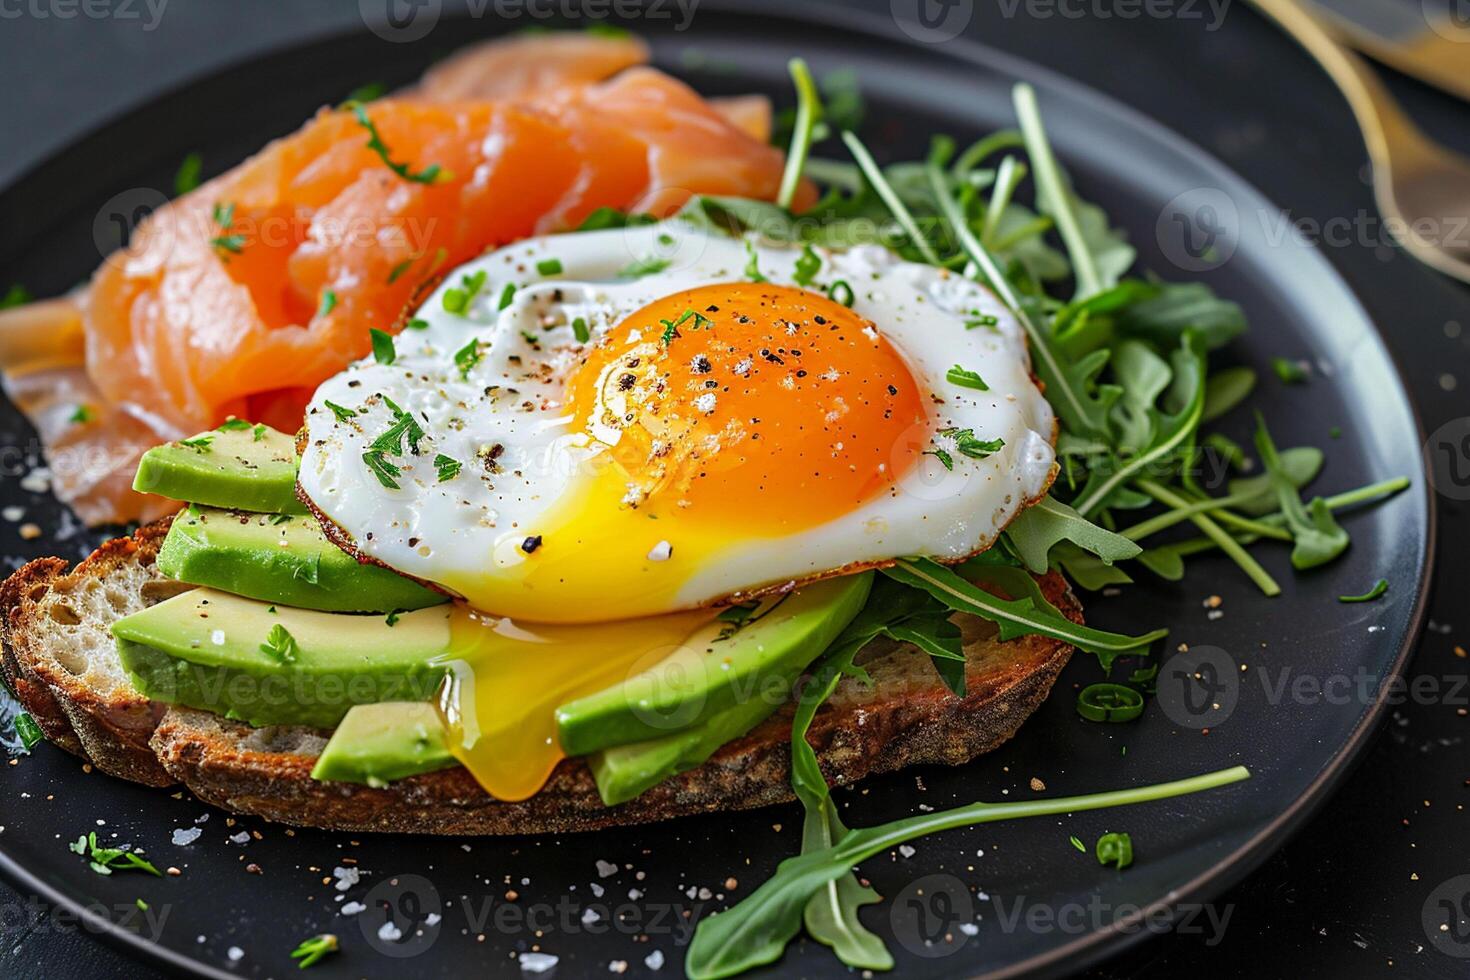 AI generated Sunny-side up egg on avocado toast, smoked salmon, arugula garnish. A gourmet meal that's as nutritious as it is photogenic, ideal for modern culinary trends. photo